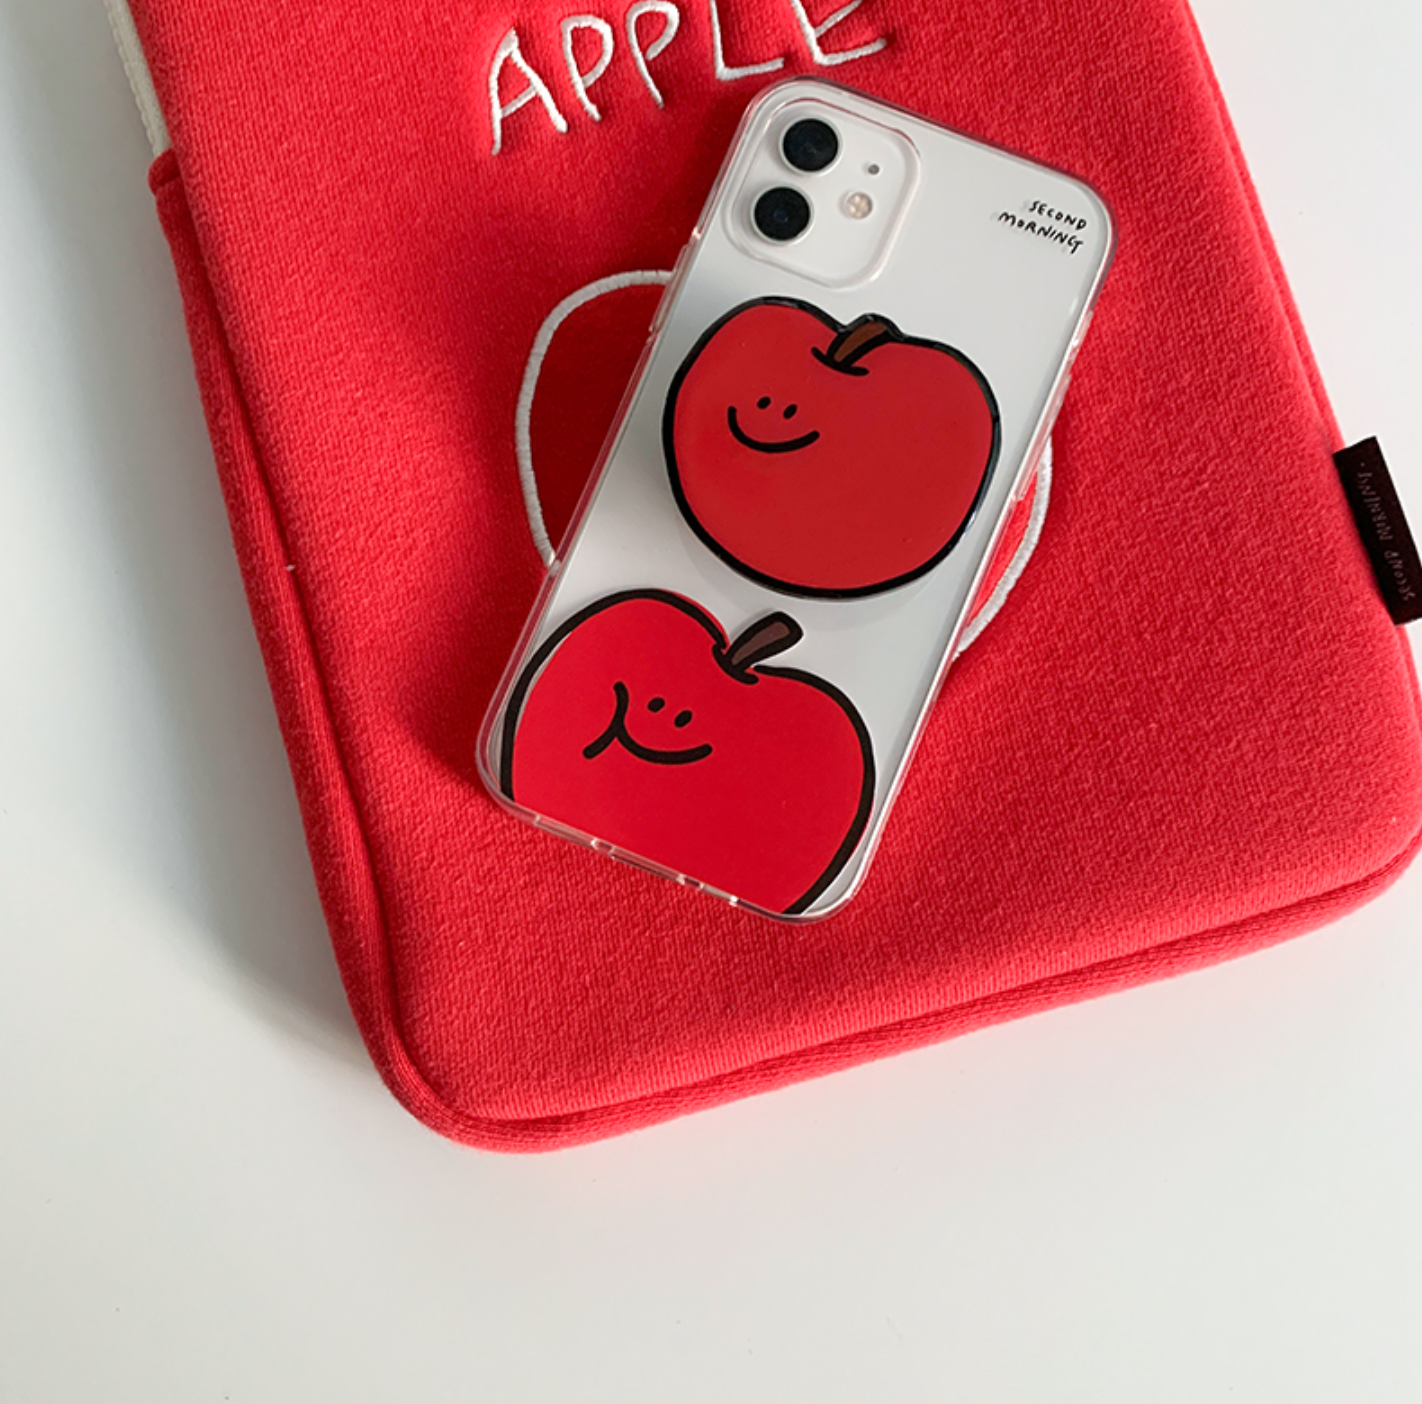 [second morning] Pretty Apple Jelly Case